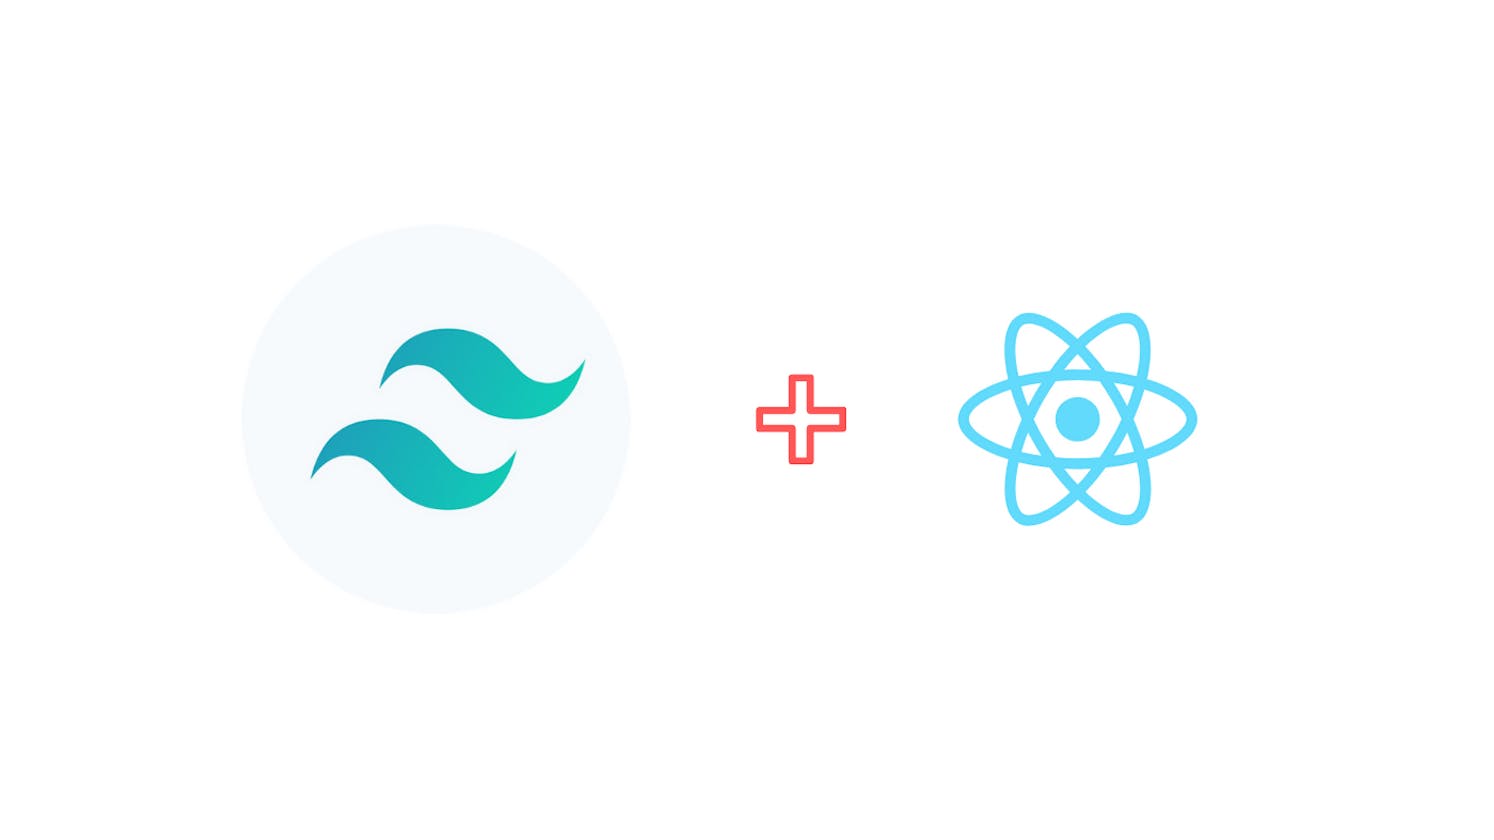 Add tailwind (JIT) to a react app without ejecting or using craco